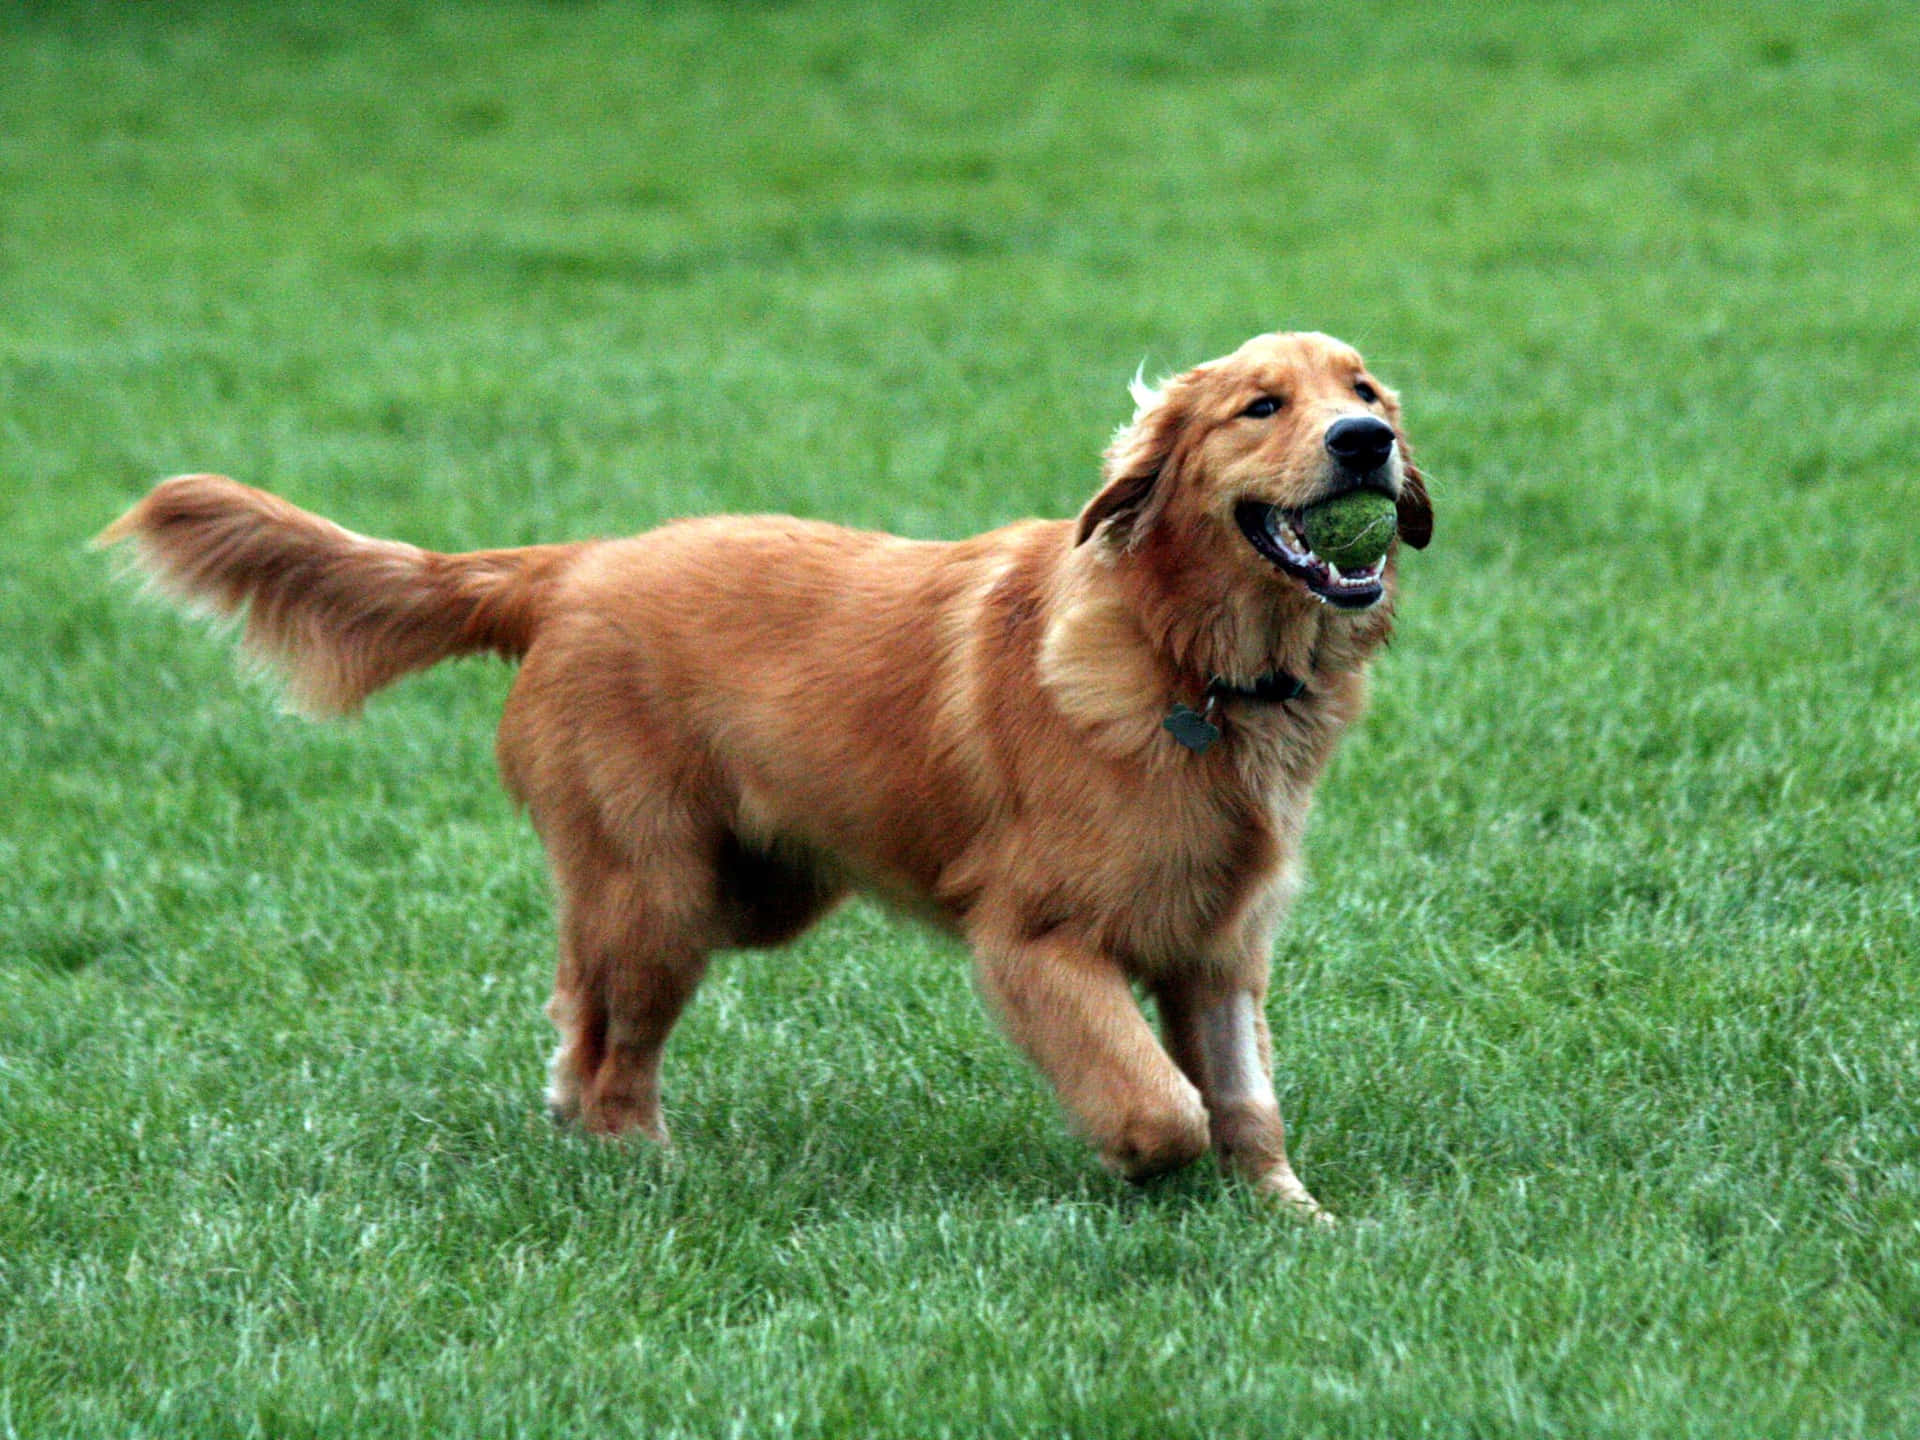 A happy golden retriever puppy smiling while taking a walk.